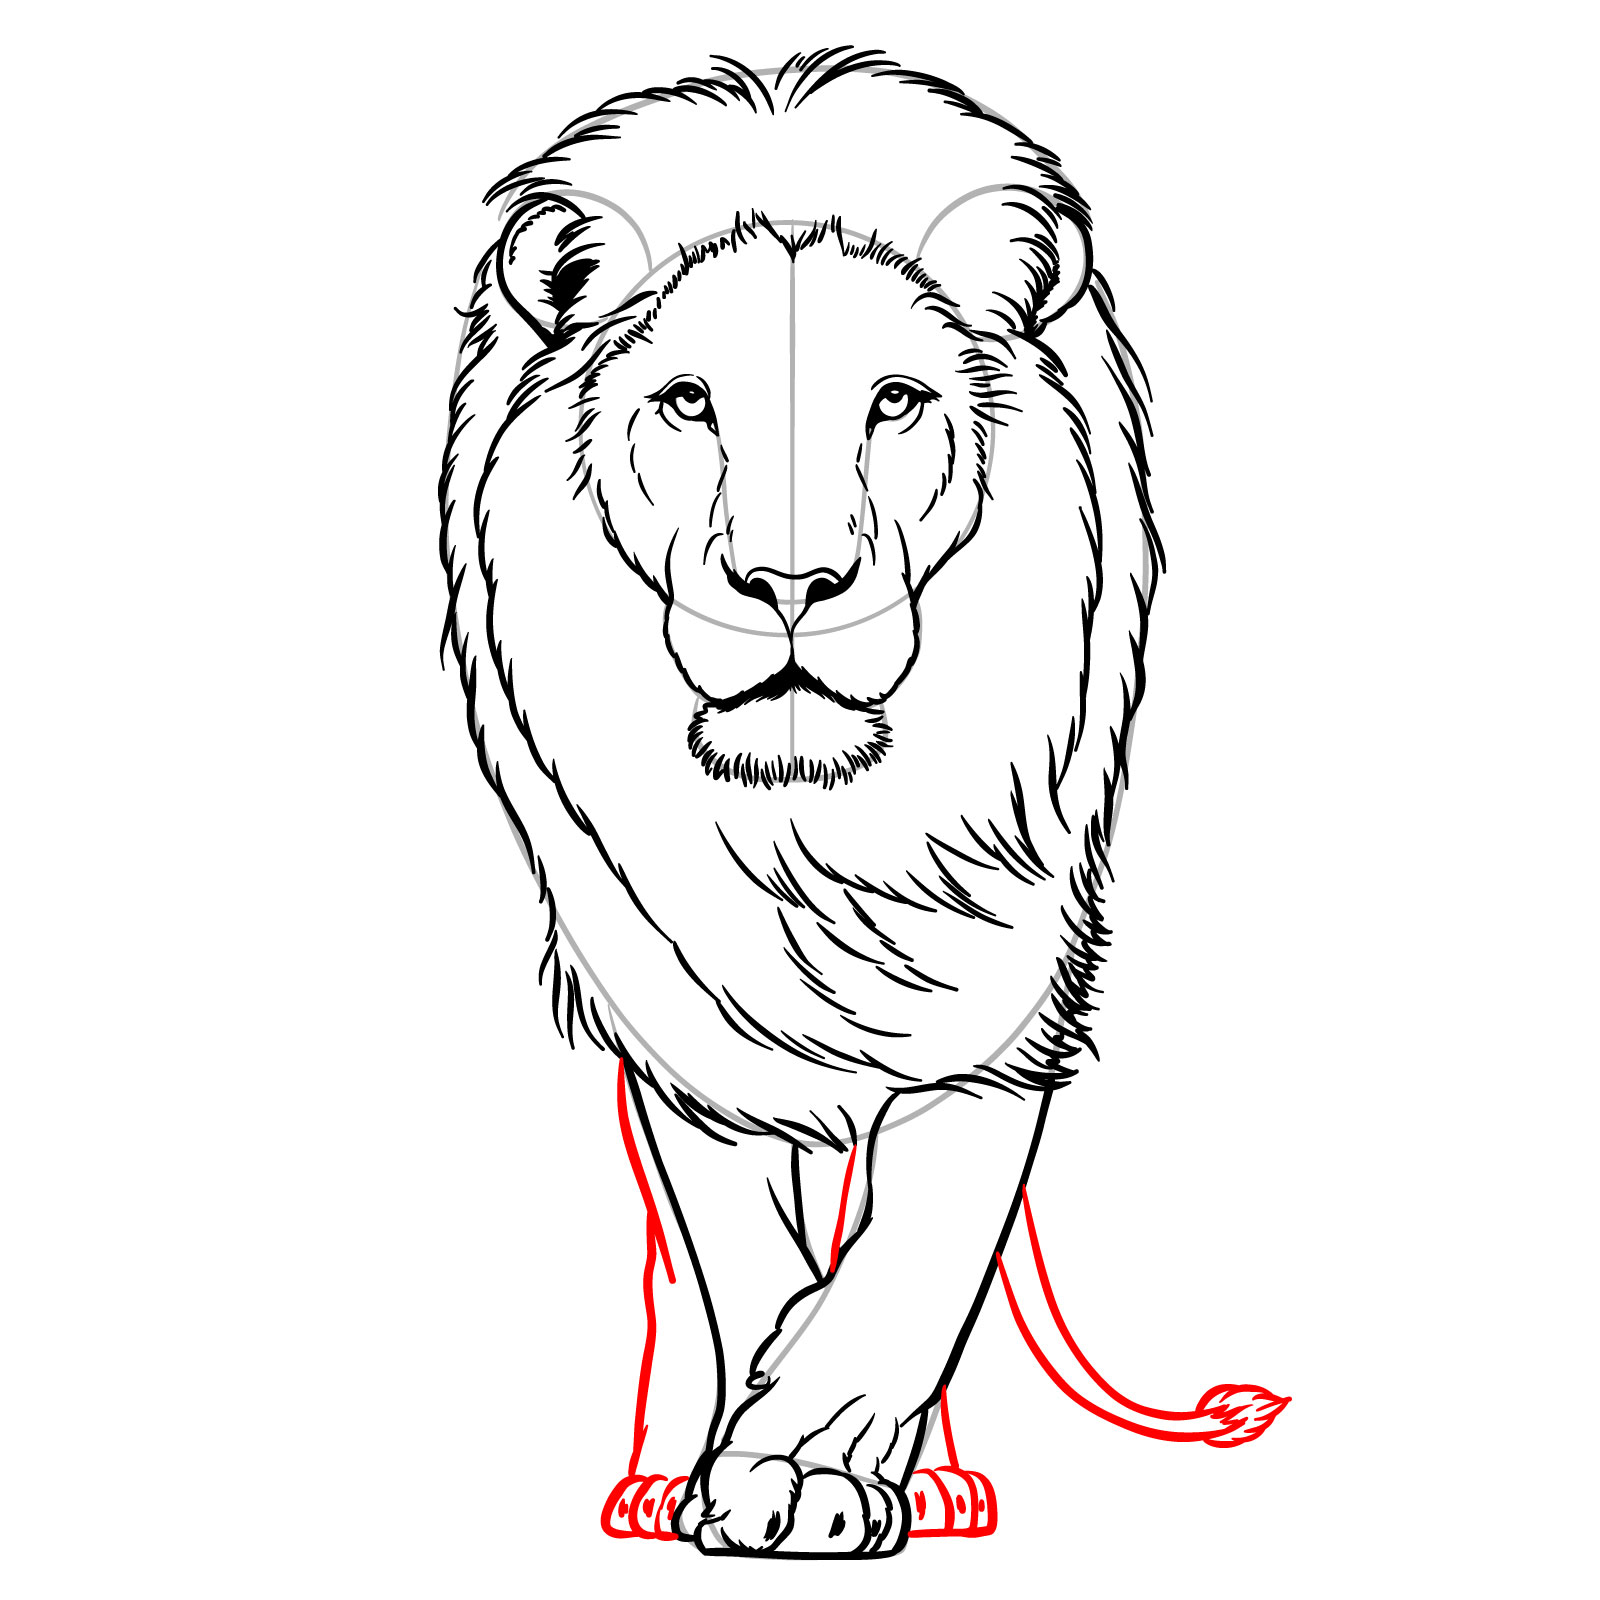 Illustrating the two hind legs and tail of a walking lion in front view - step 13